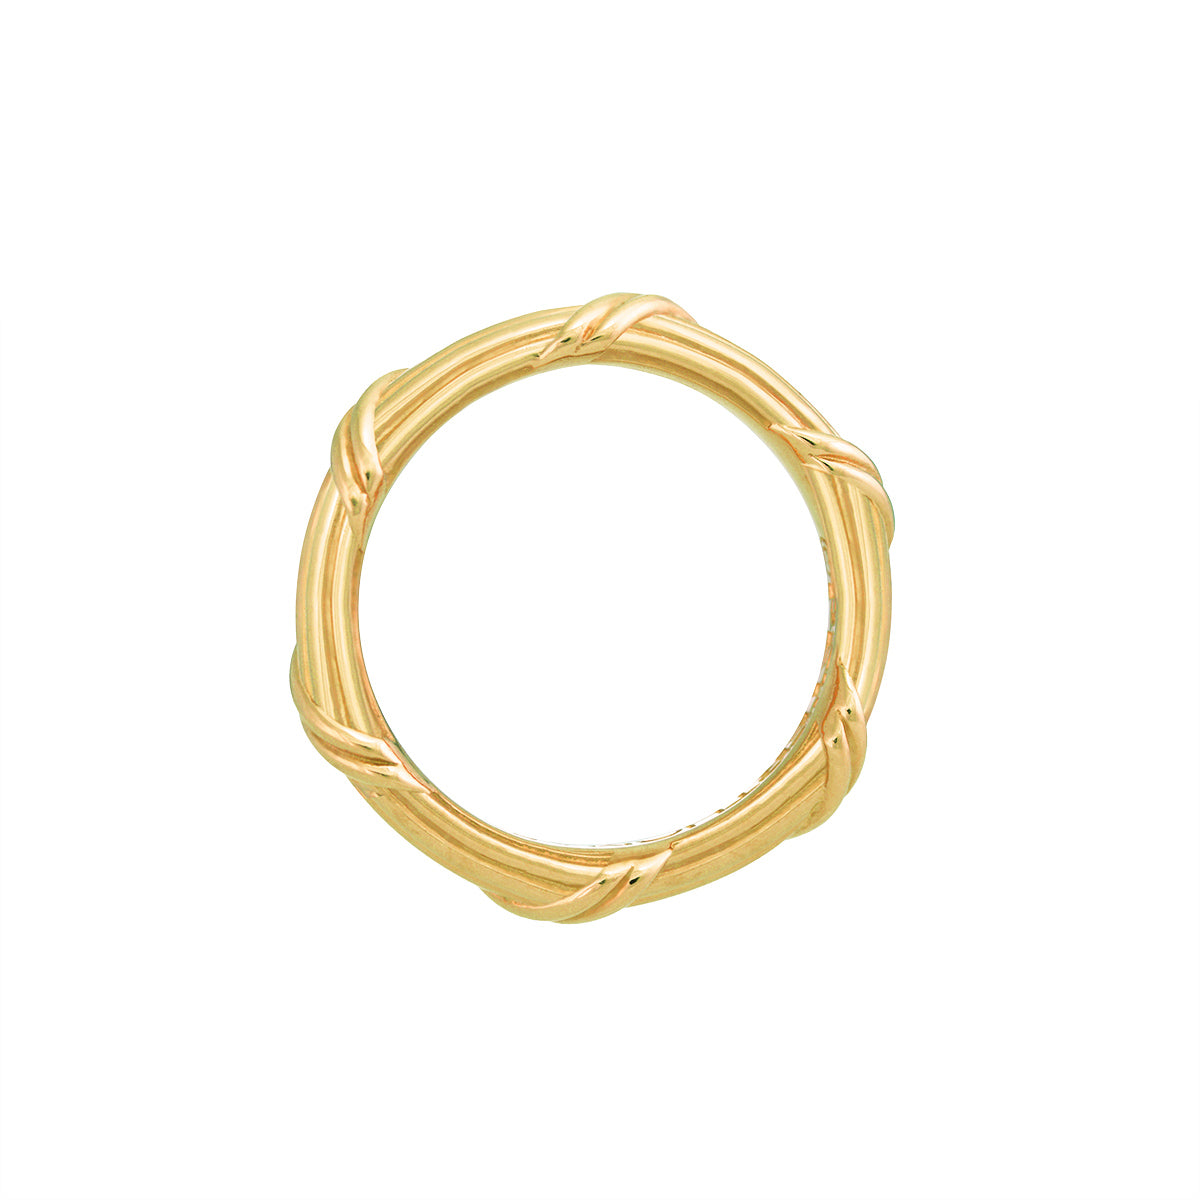 Heritage Eternity Band in 18K yellow gold 3 mm Sizes 4 - 9